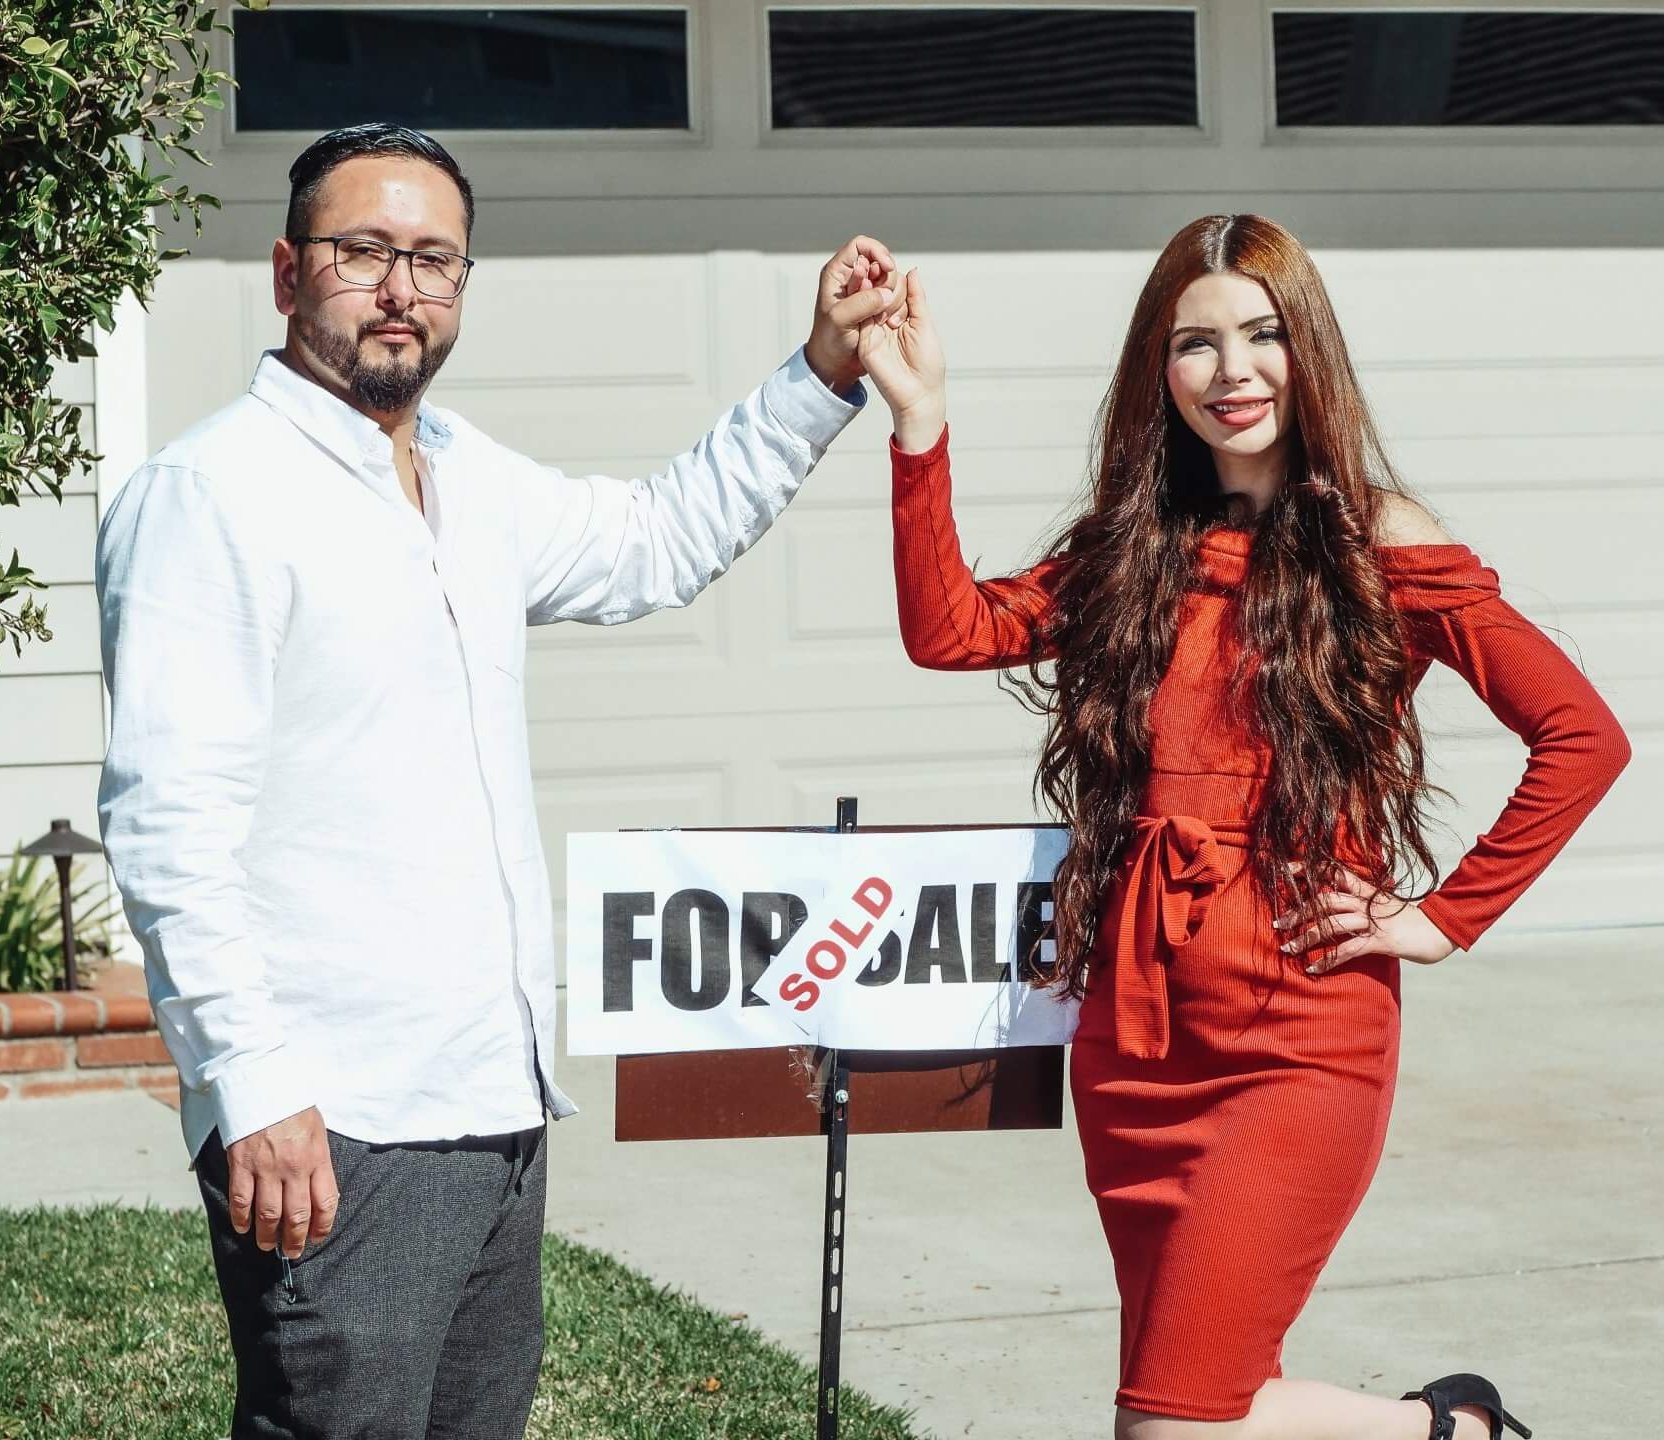 Man with glasses and white shirt holding hands with woman who is wearing a red dress over a sold sign in front of a house they purchased knowing the top 5 reasons to buy a home worked best for their buying situation.